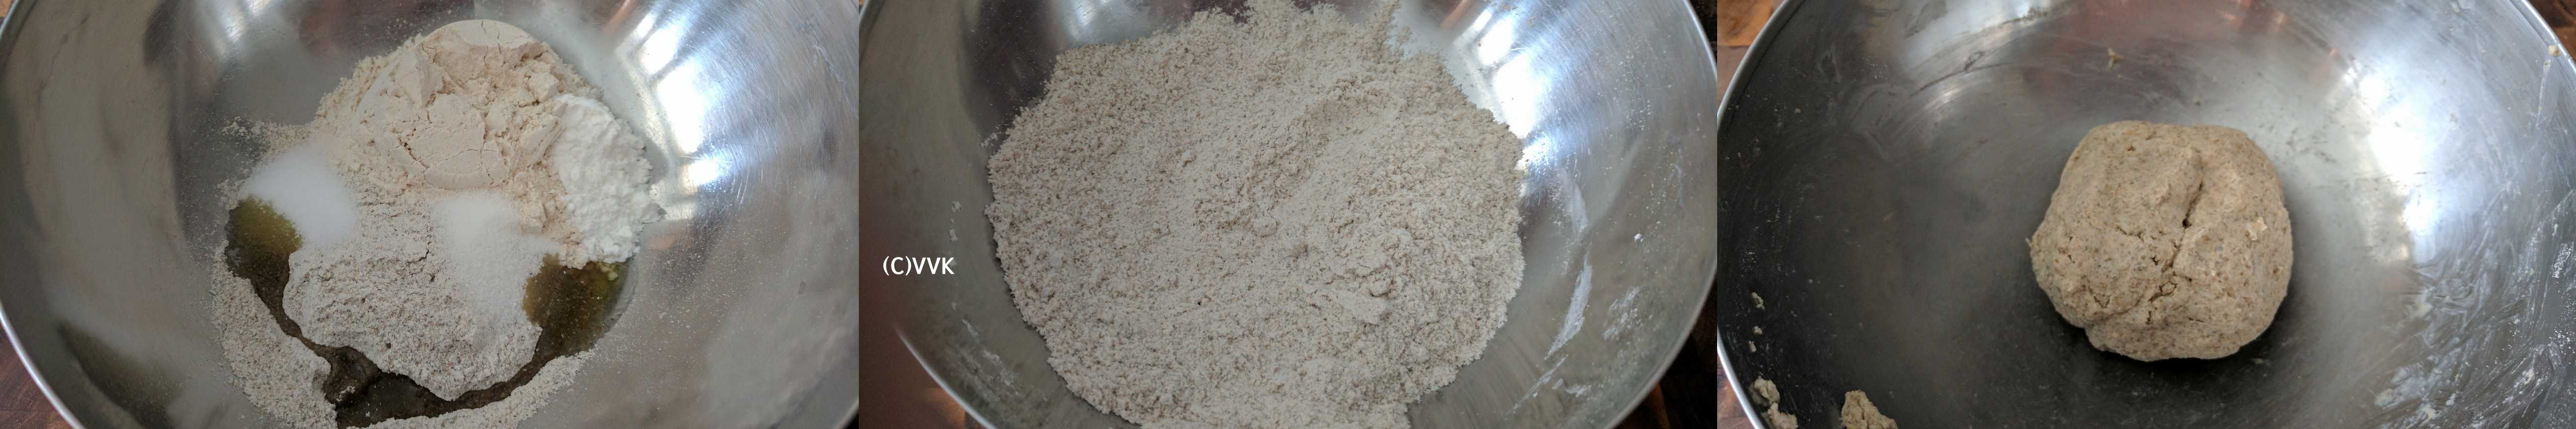 Mixing rye flour, wheat flour, baking powder, sugar, and salt in a wide mixing bowl